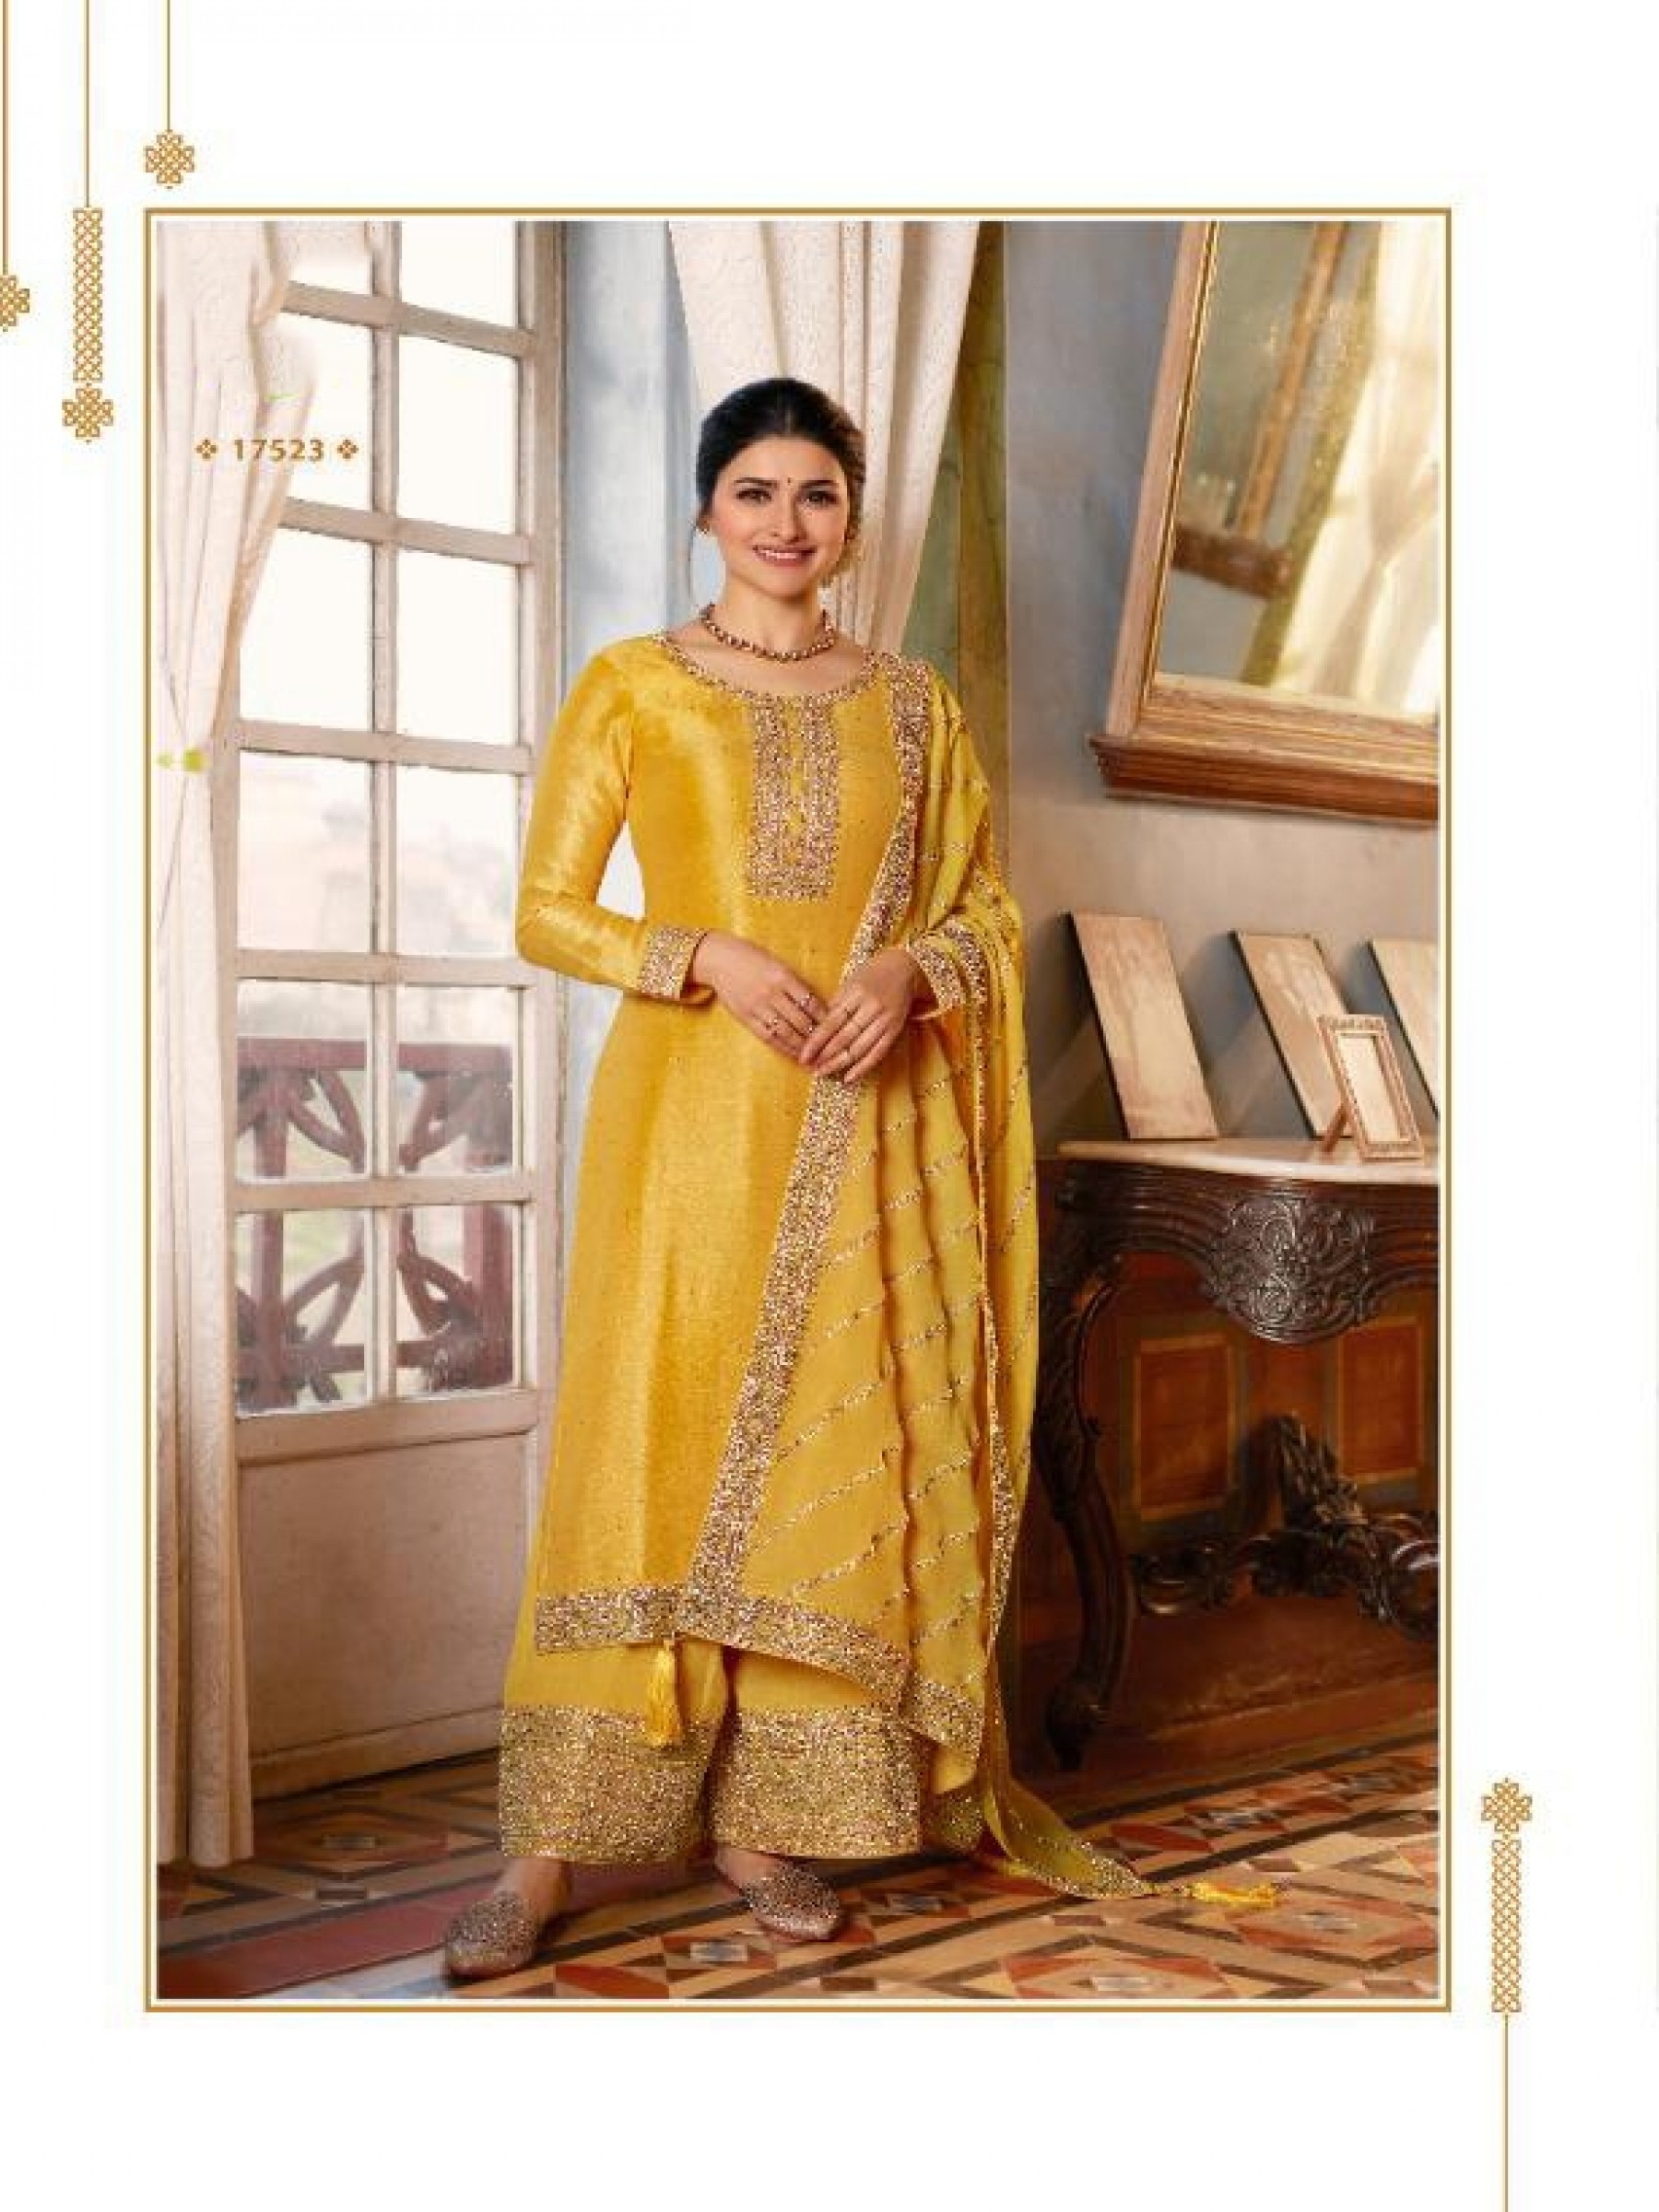  Silk Georgette  Party Wear Suit in Yellow Color with Embroidery Work